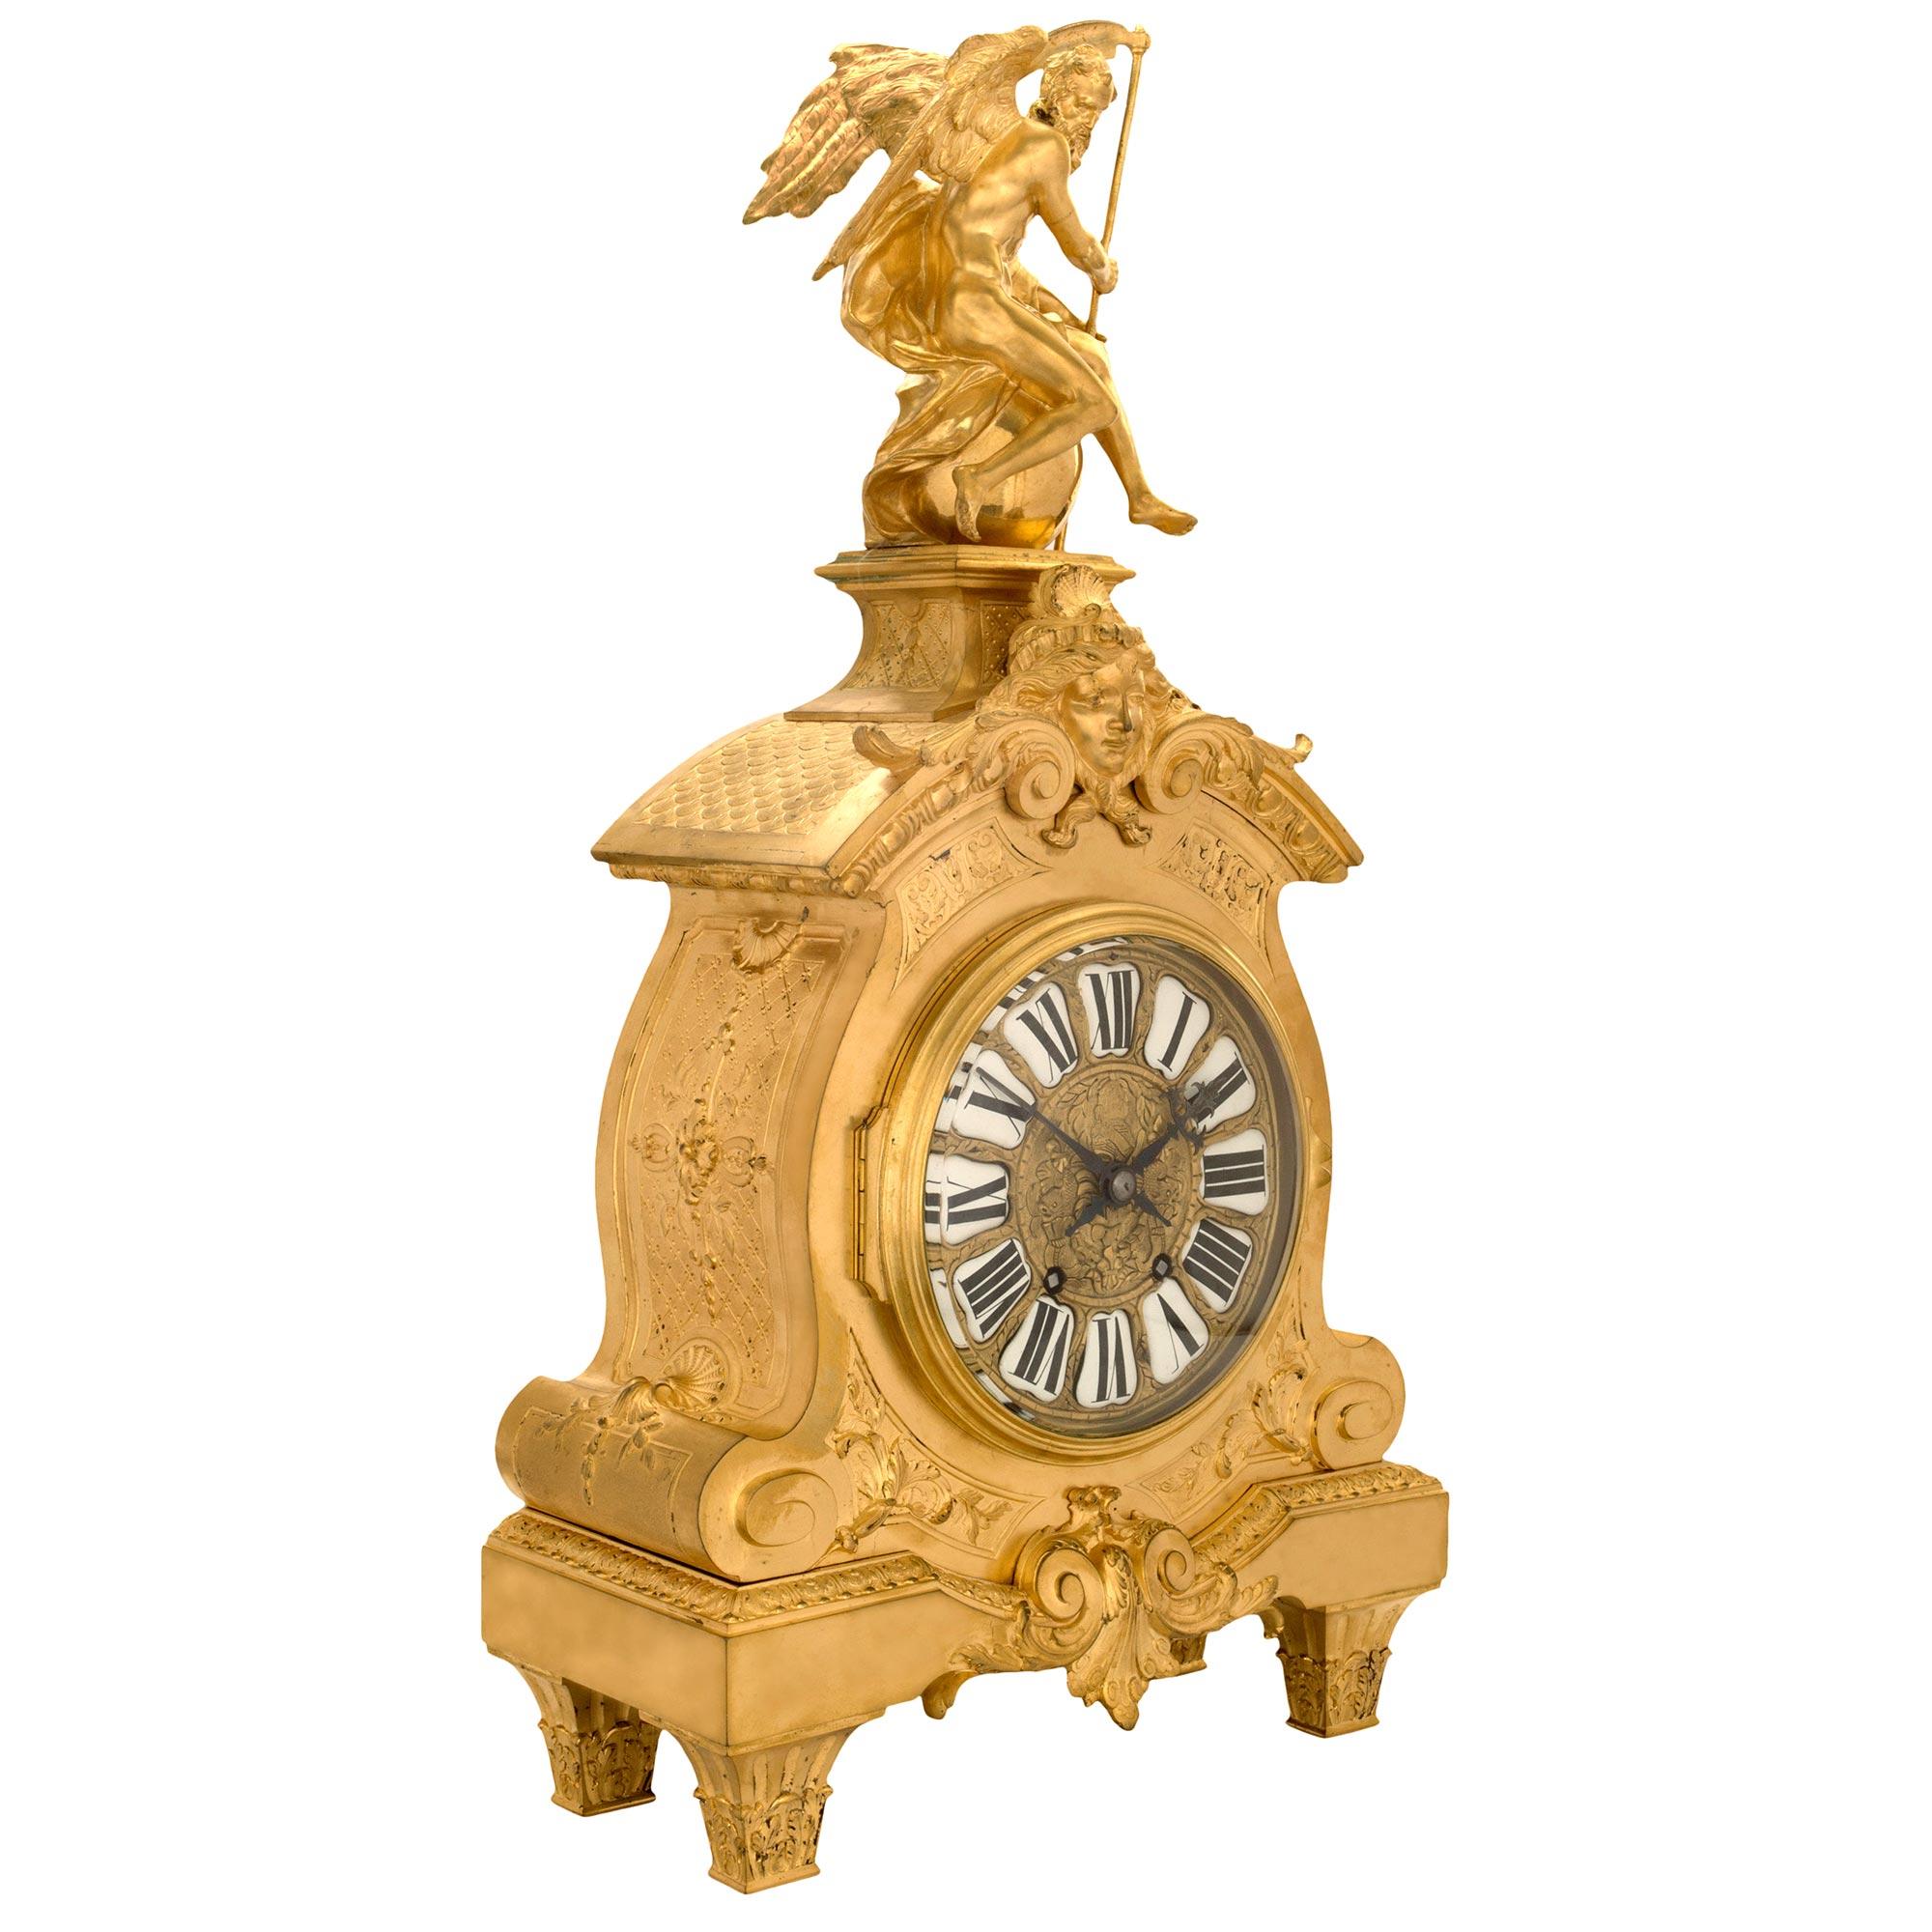 A handsome and high quality mid-19th century French Louis XIV st. ormolu clock. The clock is raised by four tapered fluted legs decorated with acanthus leaves. The scalloped shaped center frieze is with a central reserve of 